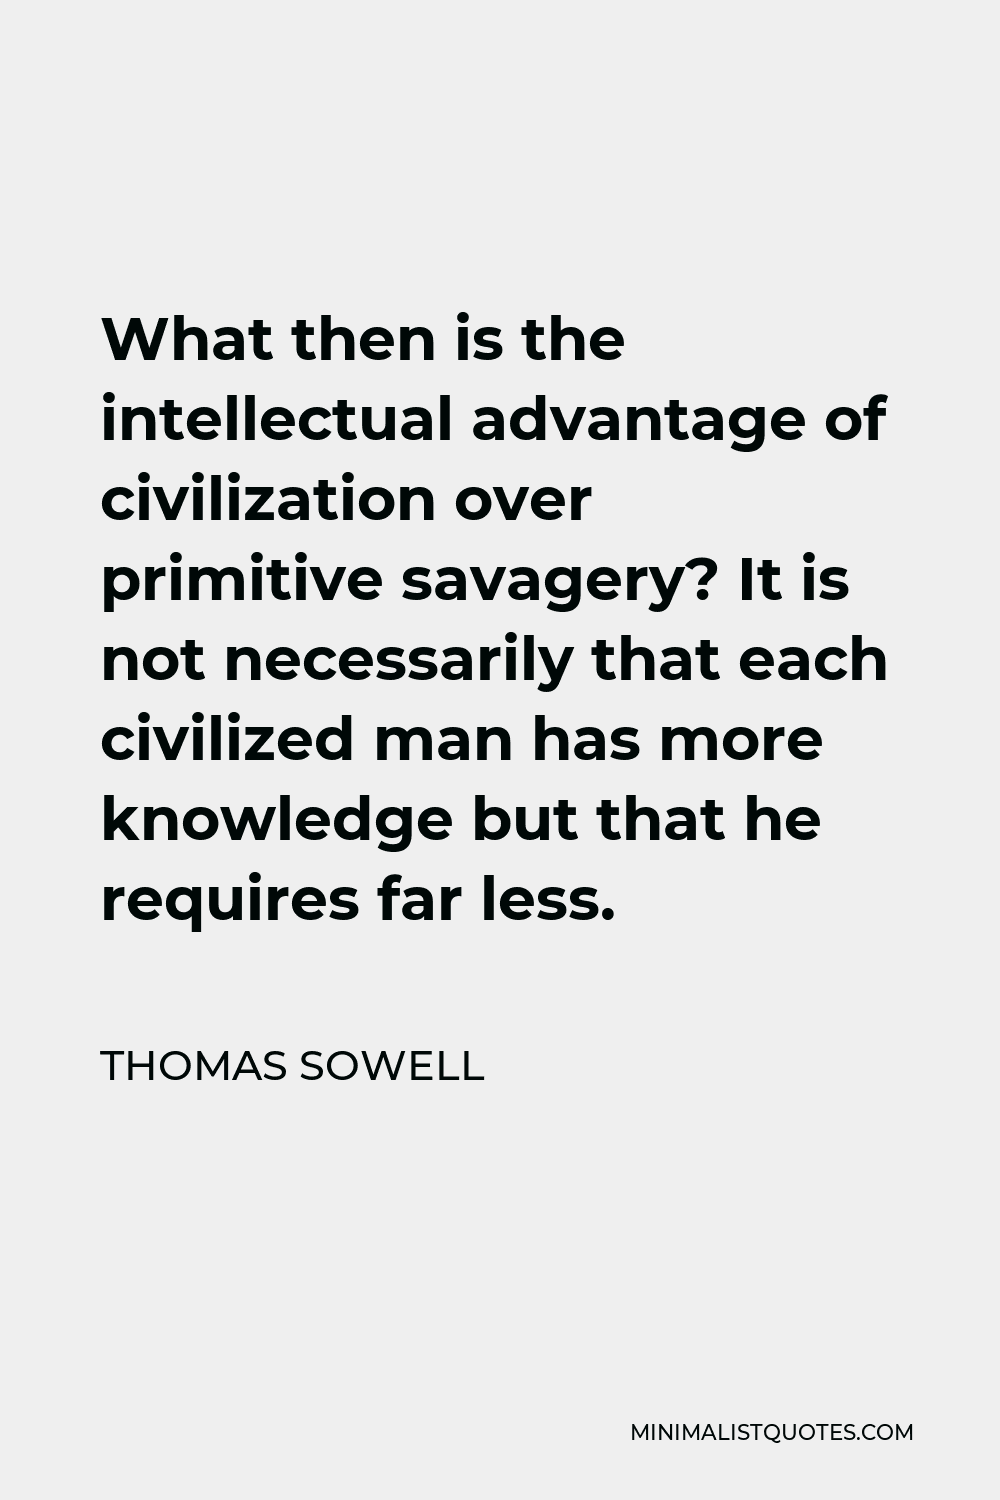 Thomas Sowell Quote - What then is the intellectual advantage of civilization over primitive savagery? It is not necessarily that each civilized man has more knowledge but that he requires far less.